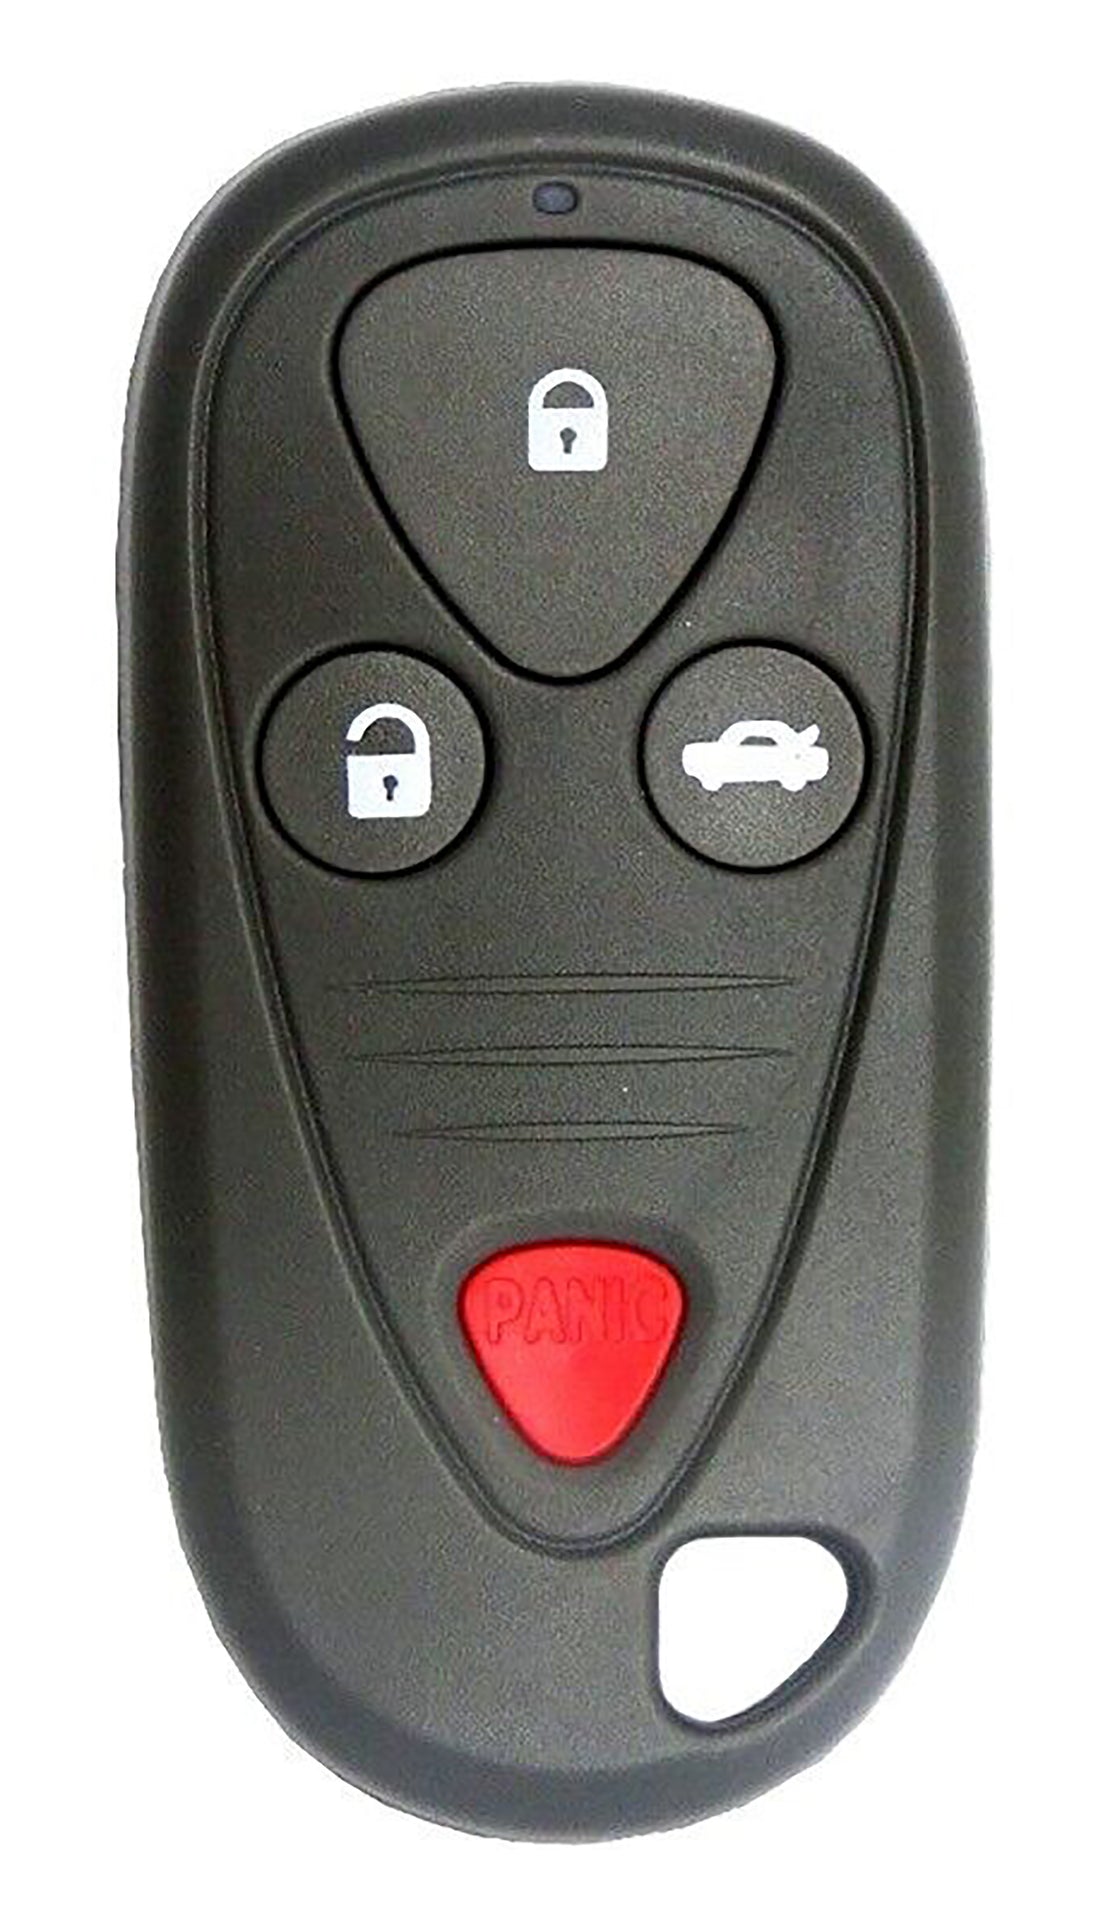 1x New Replacement Key Fob Remote Compatible with & Fit For Acura Vehicles (Check Fitment) - MPN E4EG8D-444H-A-06